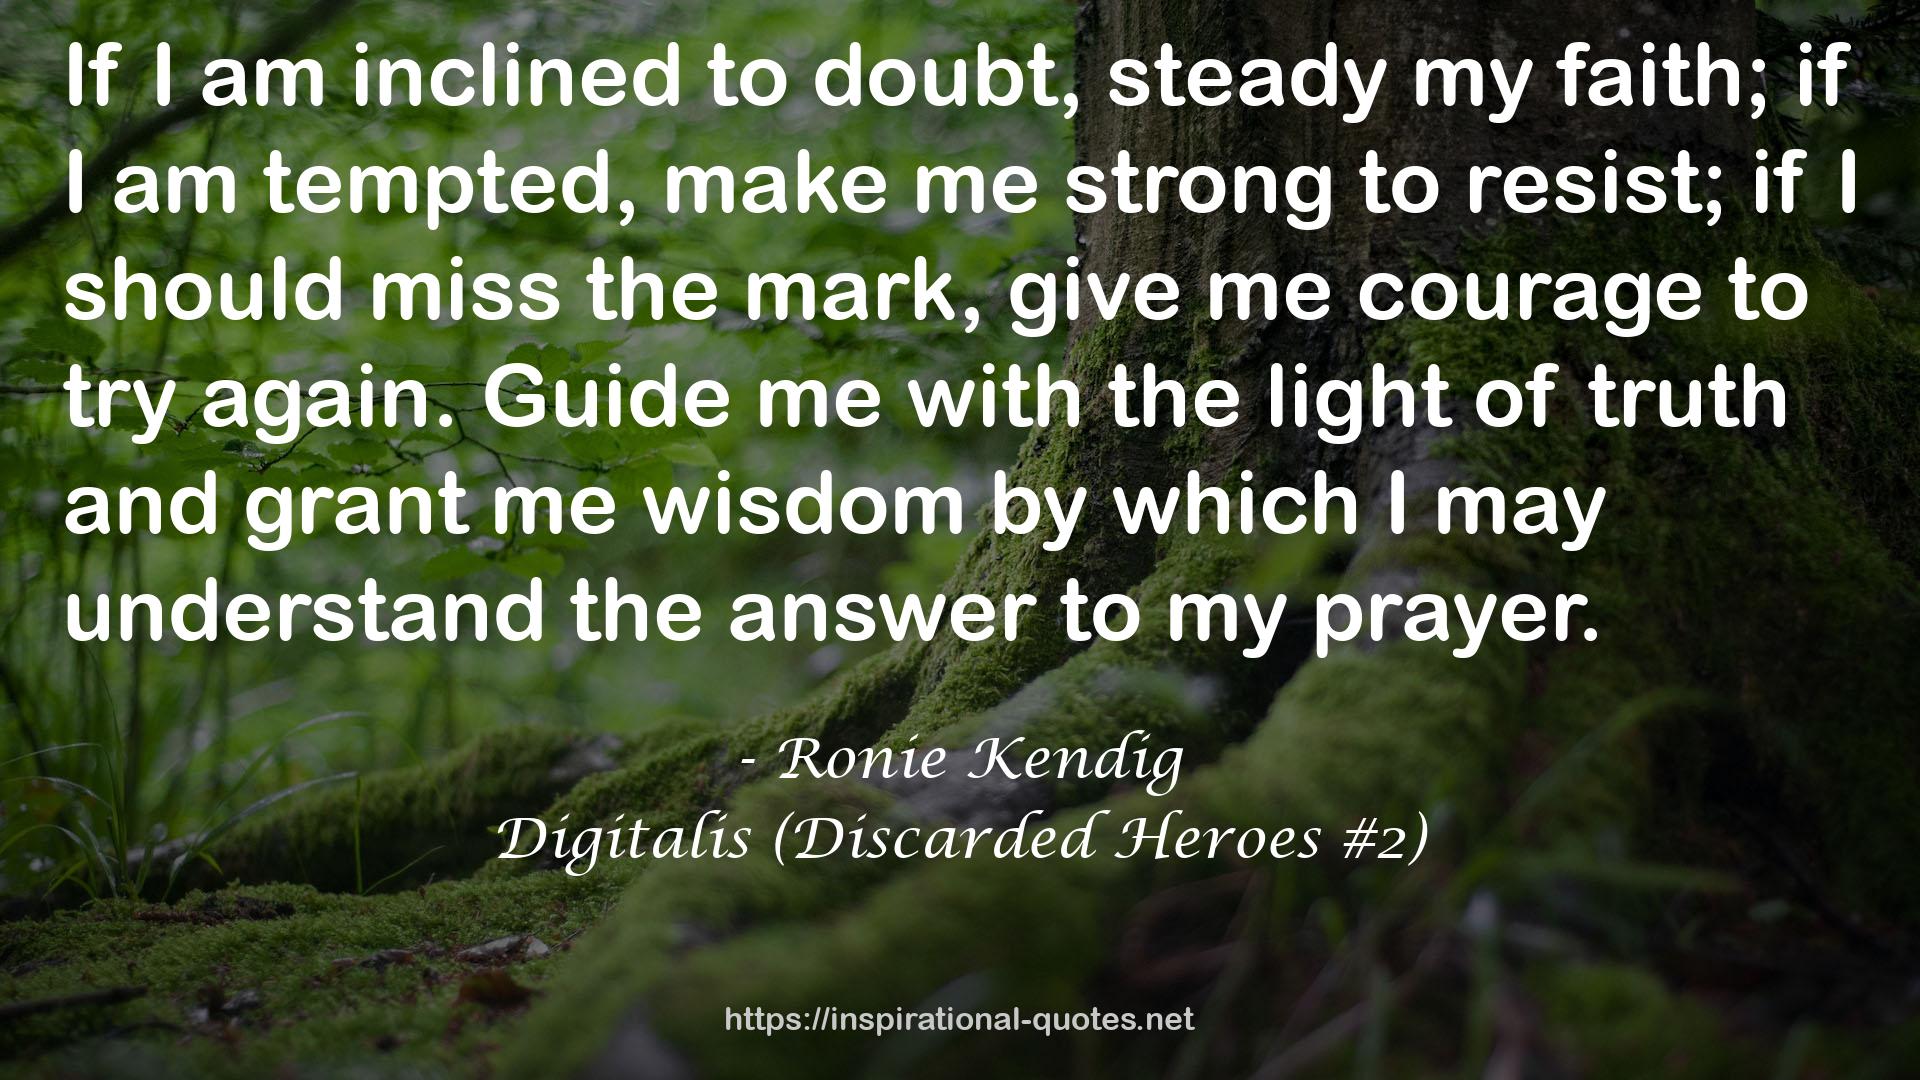 Digitalis (Discarded Heroes #2) QUOTES